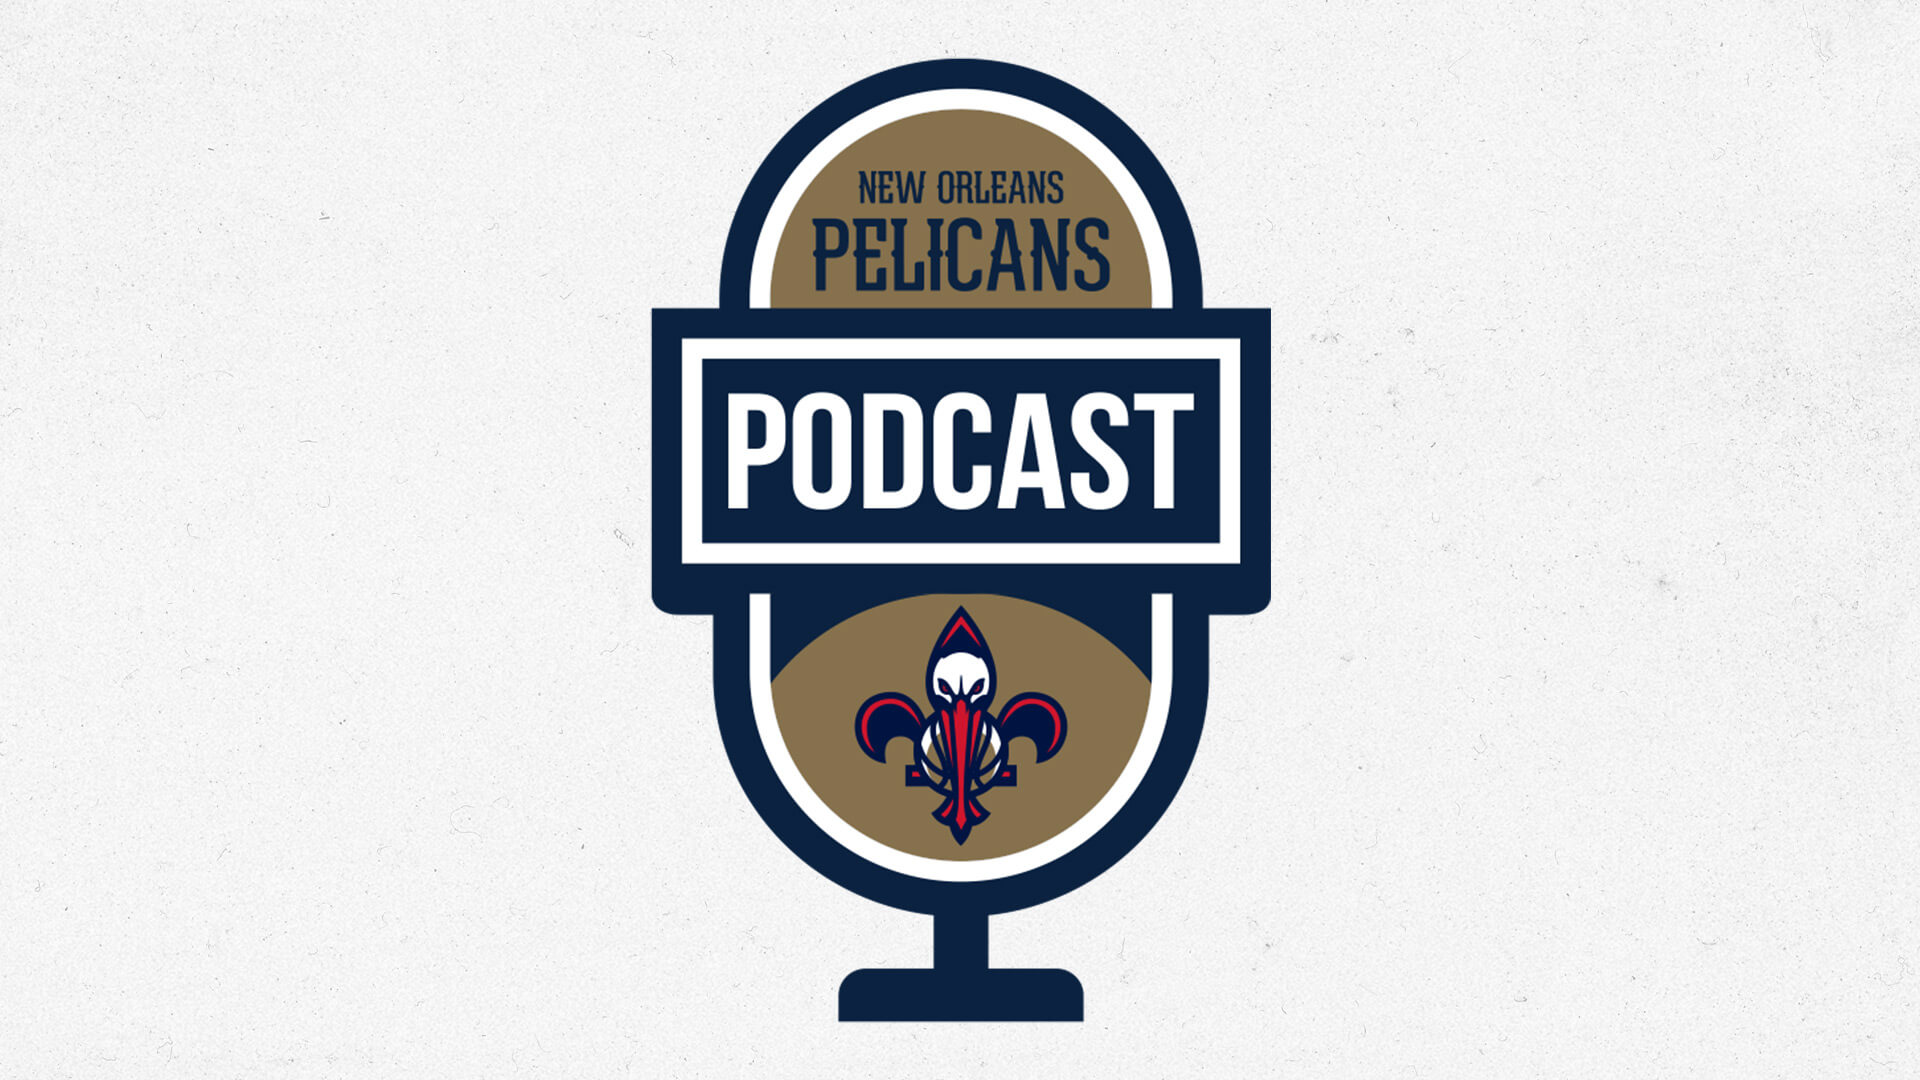 Trey Murphy's huge 41-point game, upcoming game vs. Lakers | Pelicans Podcast